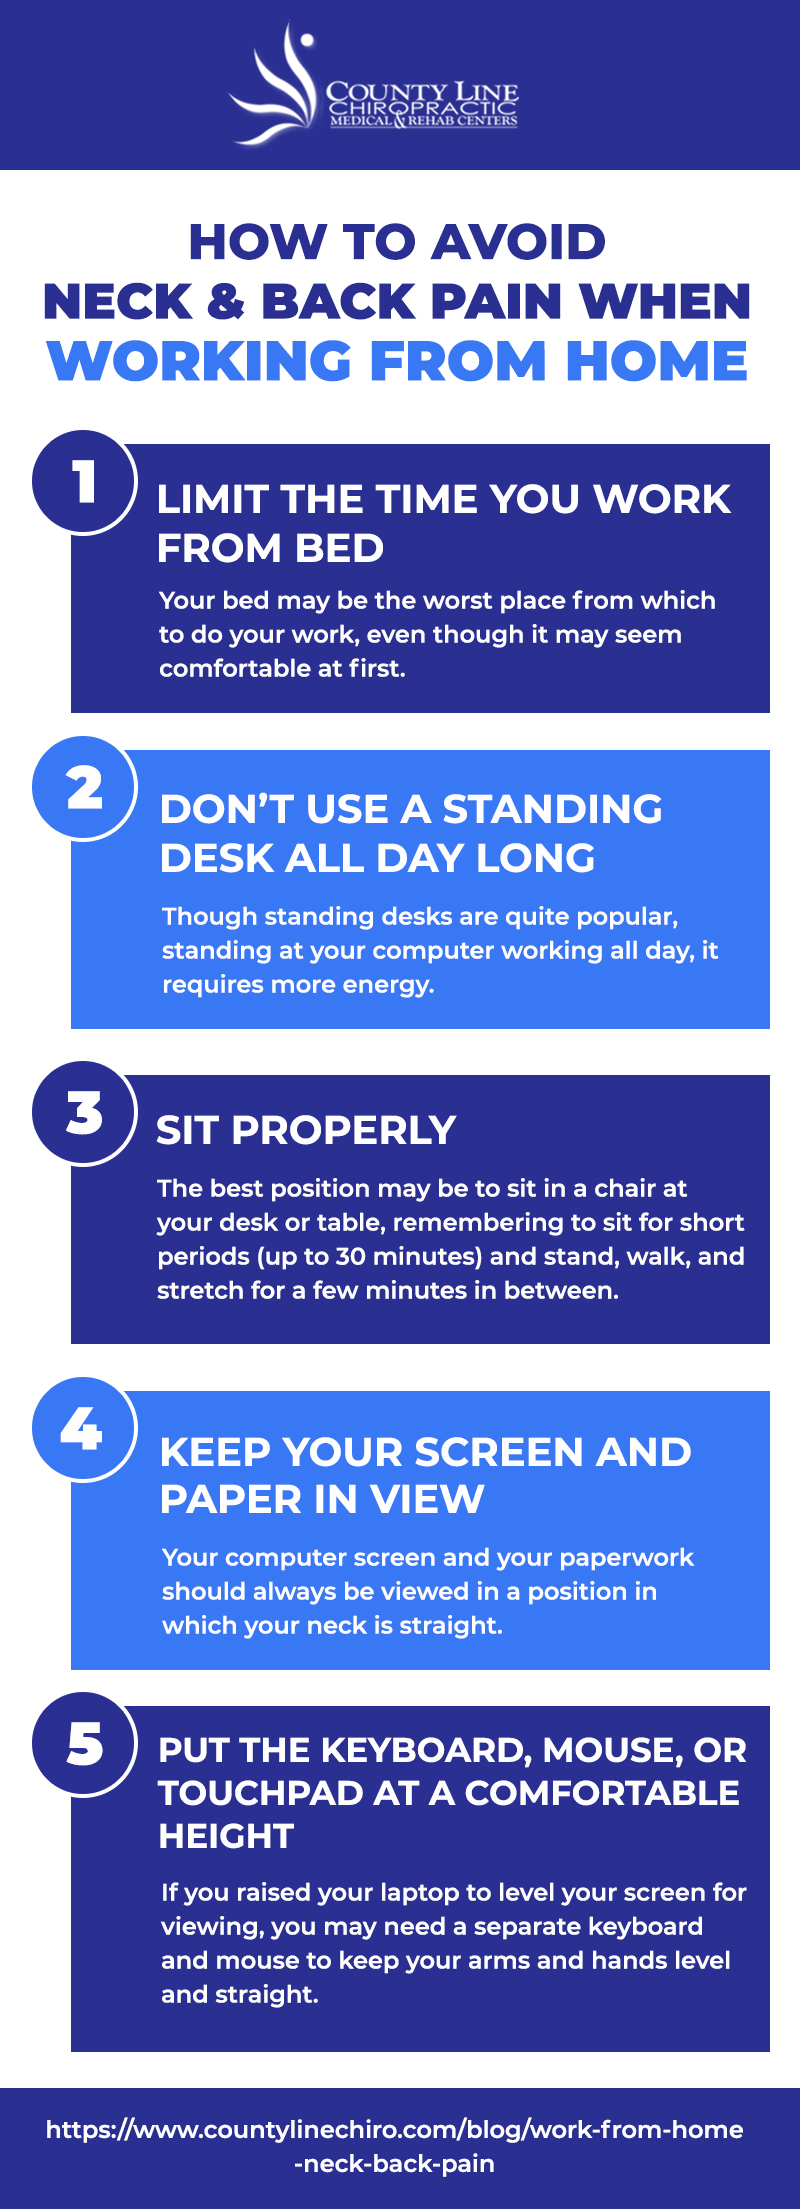 How to Avoid Neck and Back Pain When Working from Home Infographic 